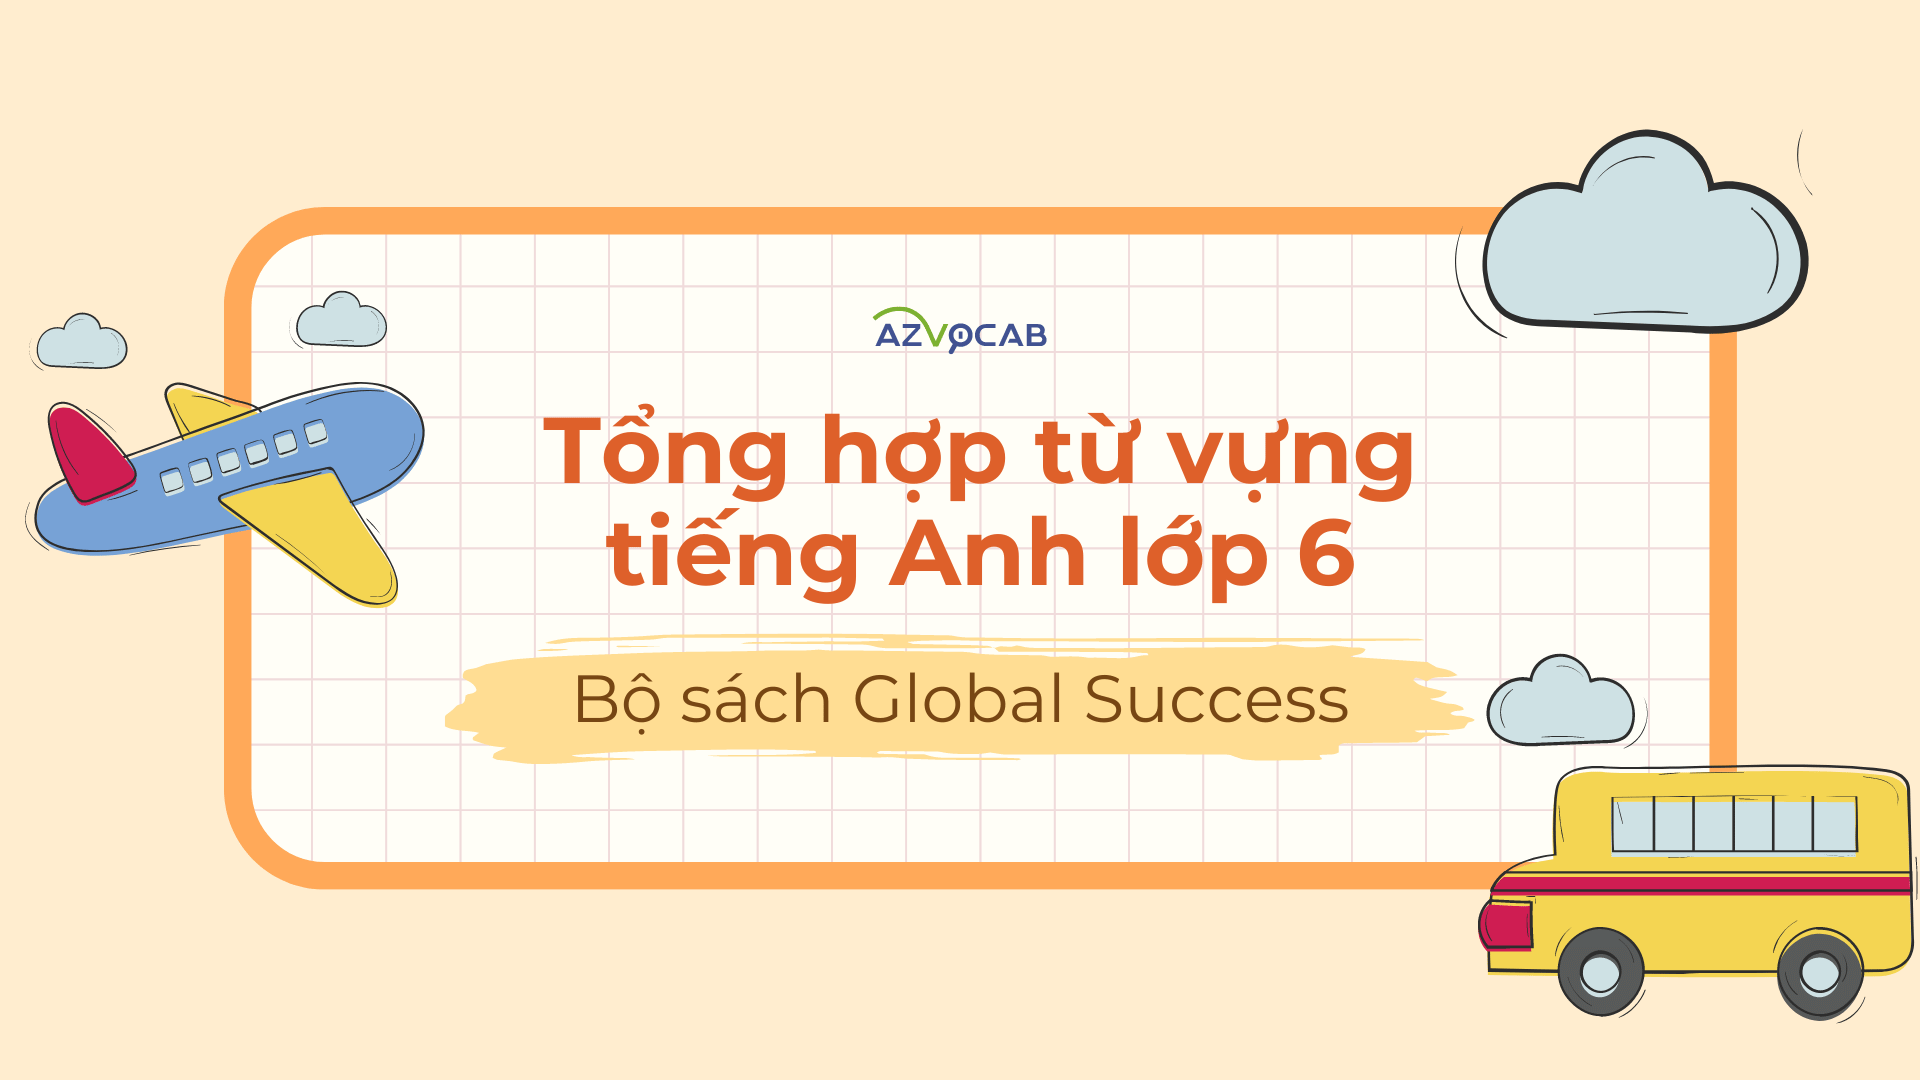 Tiếng Anh lớp 6 Global Success